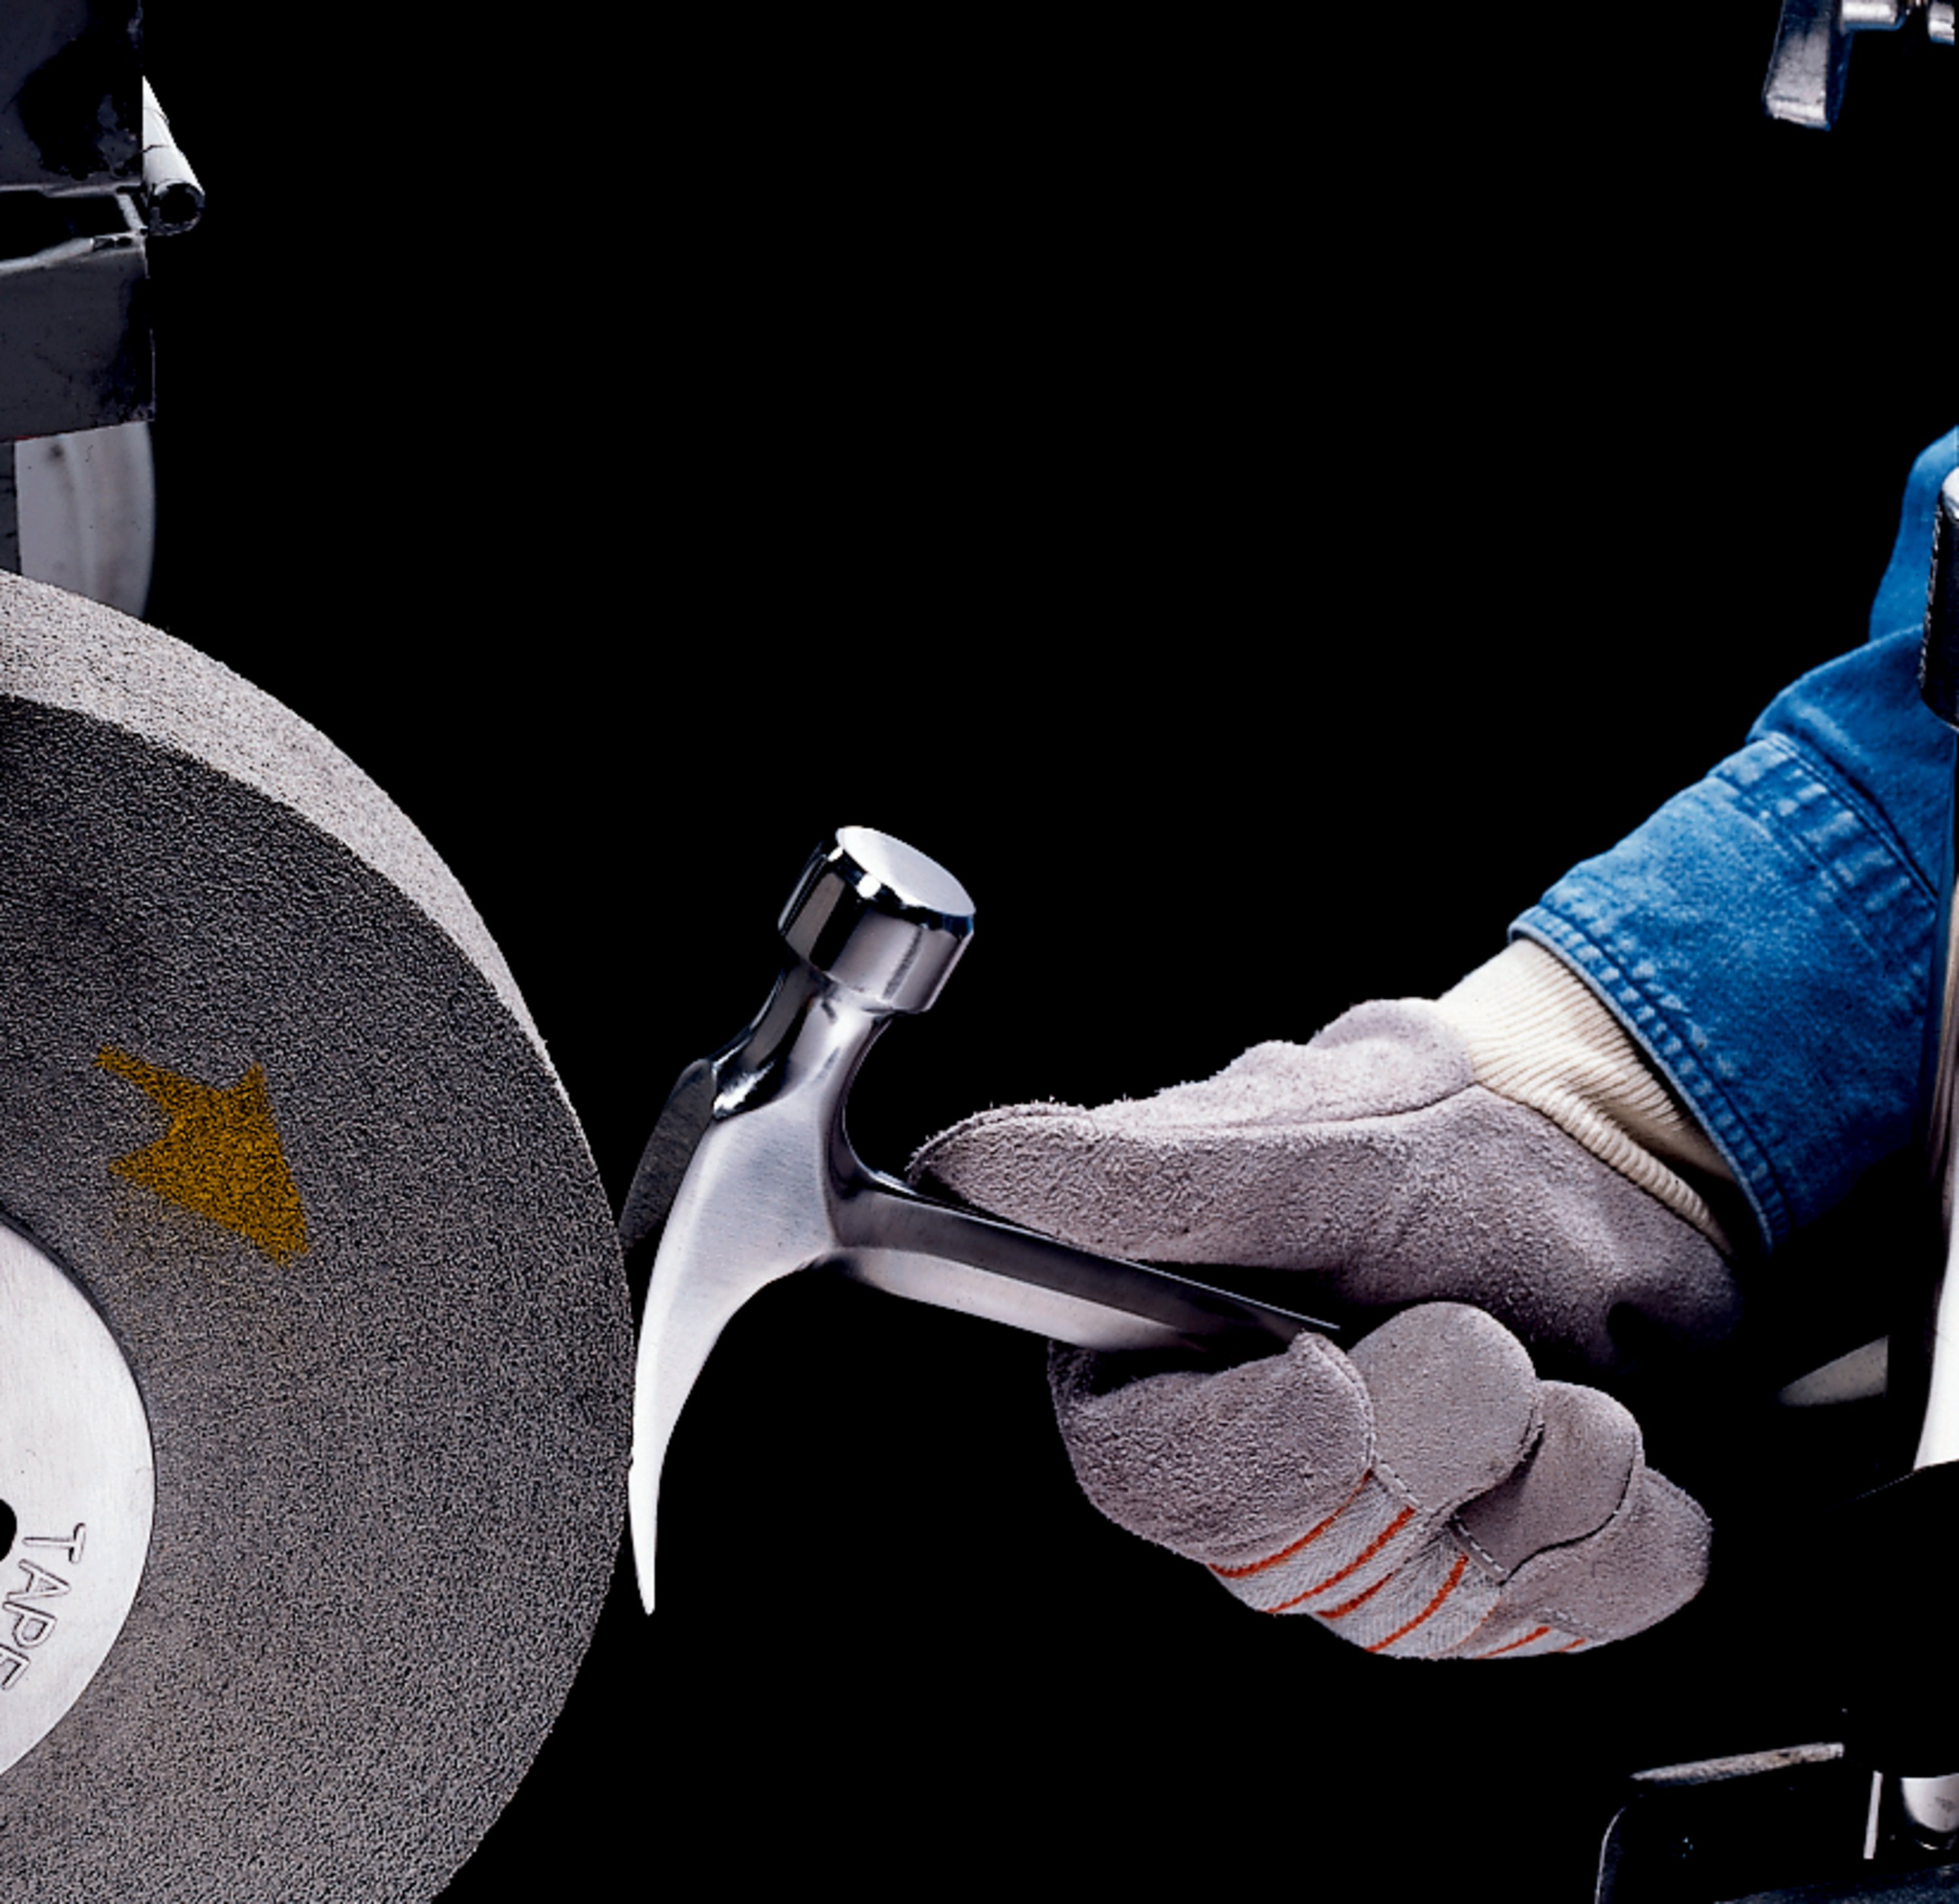 Scotch-Brite™ EX3 is an effective wheel to deburr, blend, finish and polish edges on glass, hard and soft composites, and metals such as builder's hardware, medical instruments, metal fabrication, metal implants, plumbing fixtures, and turbine engines.